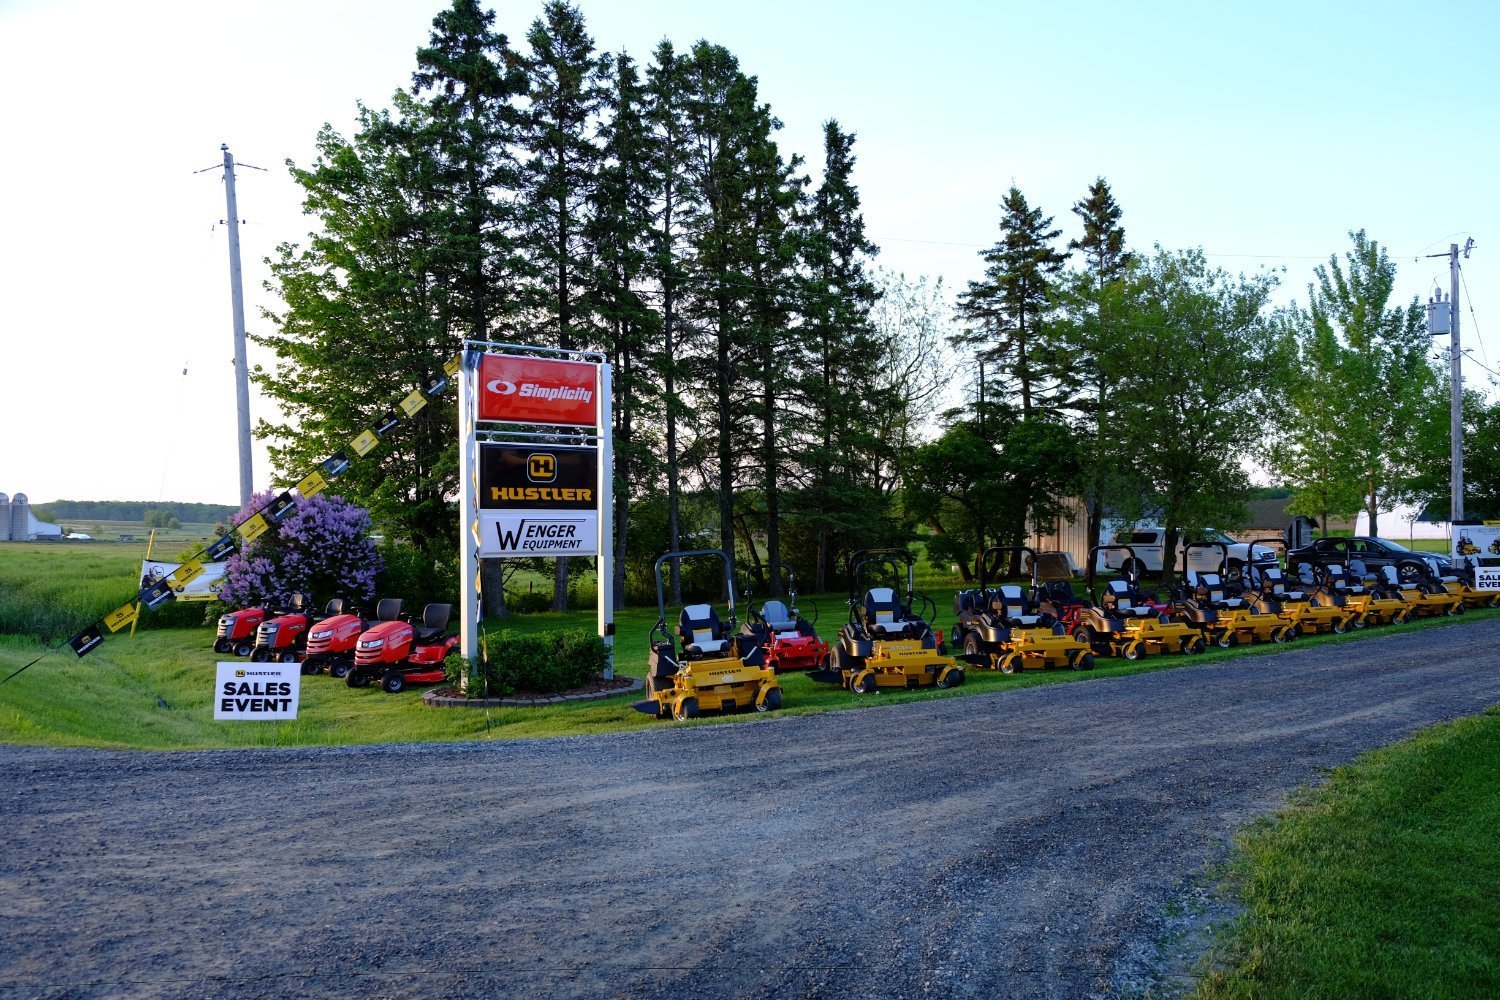 Hustler & Simplicity mowers lined up by the sign